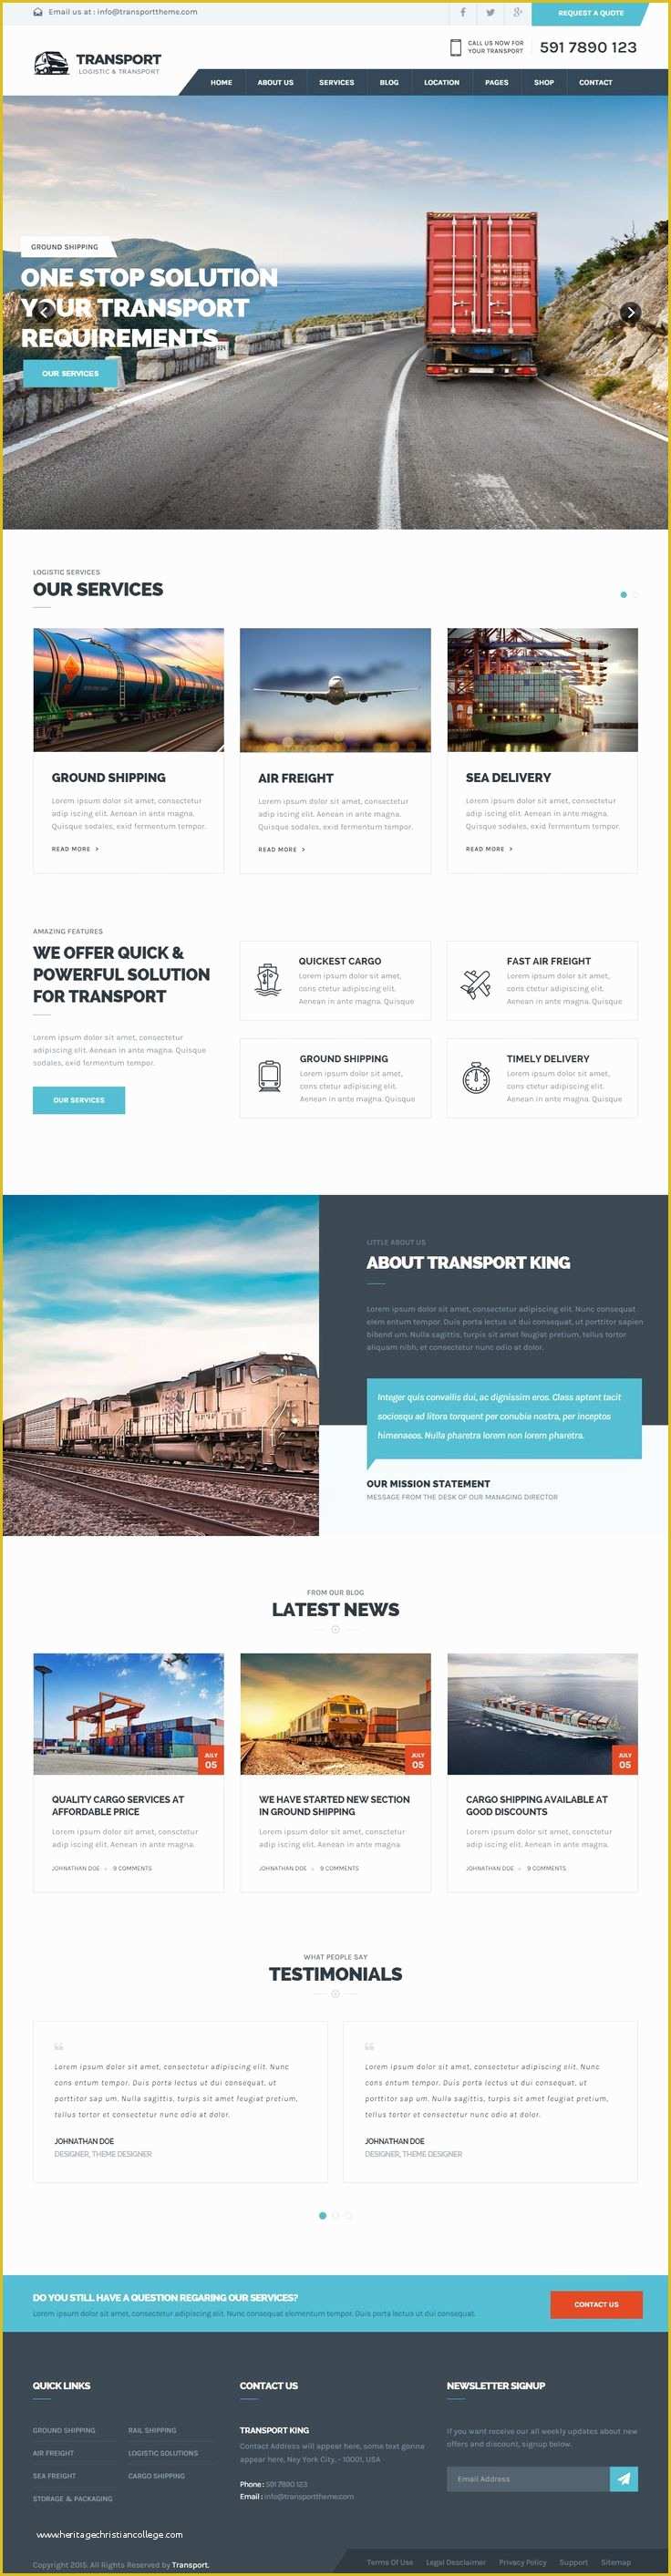 Bootstrap Parallax Scrolling Template Free Of Transport is Premium Full Responsive Retina Logistic